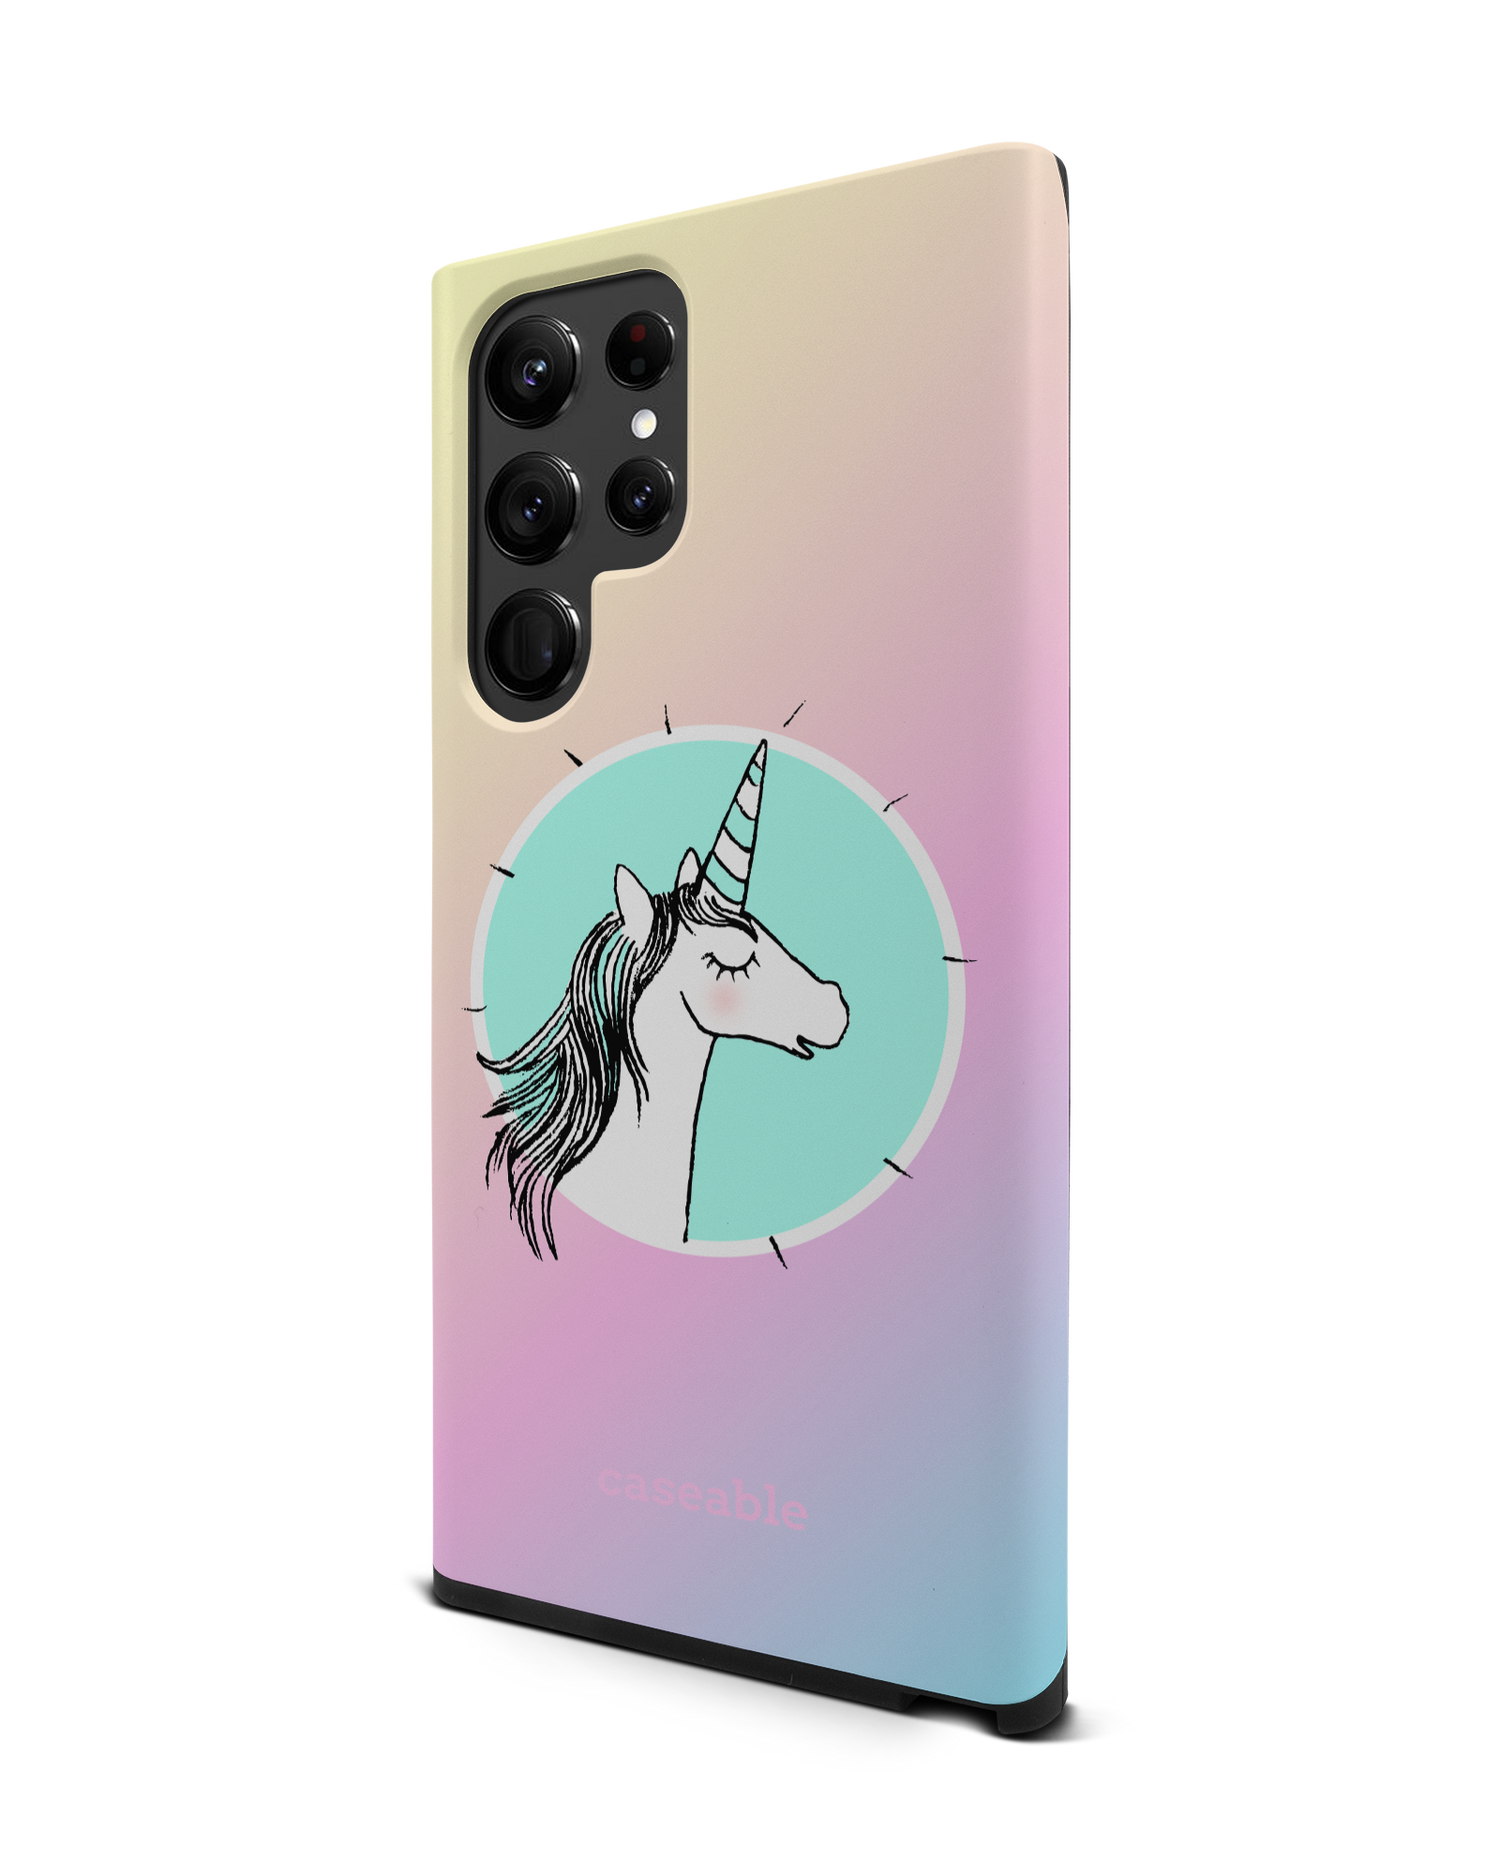 Happiness Unicorn Premium Phone Case Samsung Galaxy S22 Ultra 5G: View from the right side